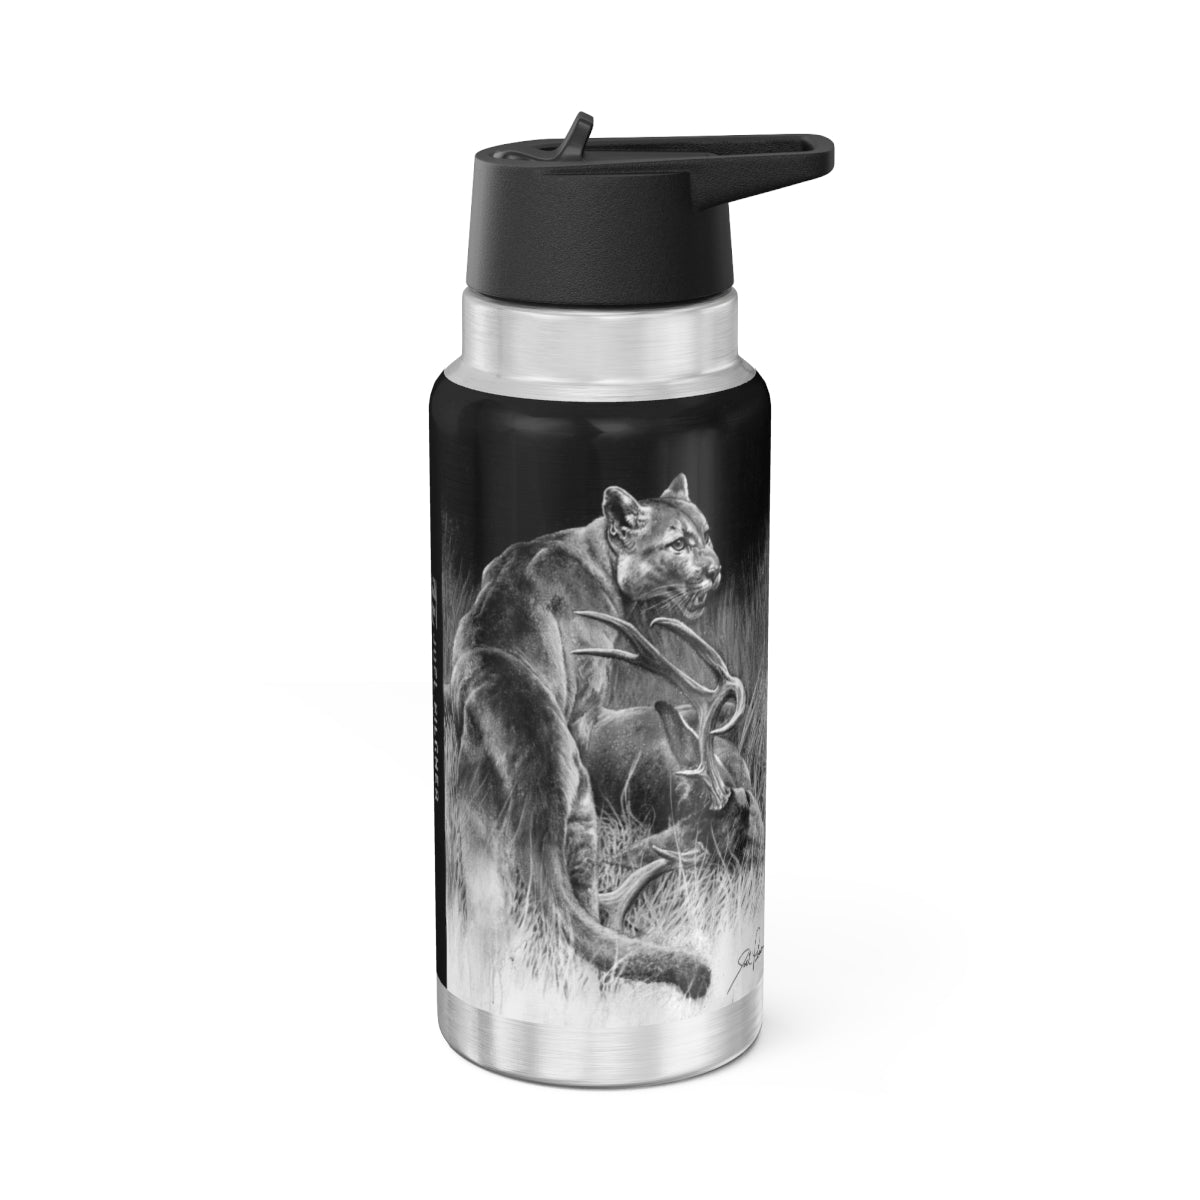 "Food Chain" 32oz Stainless Steel Bottle